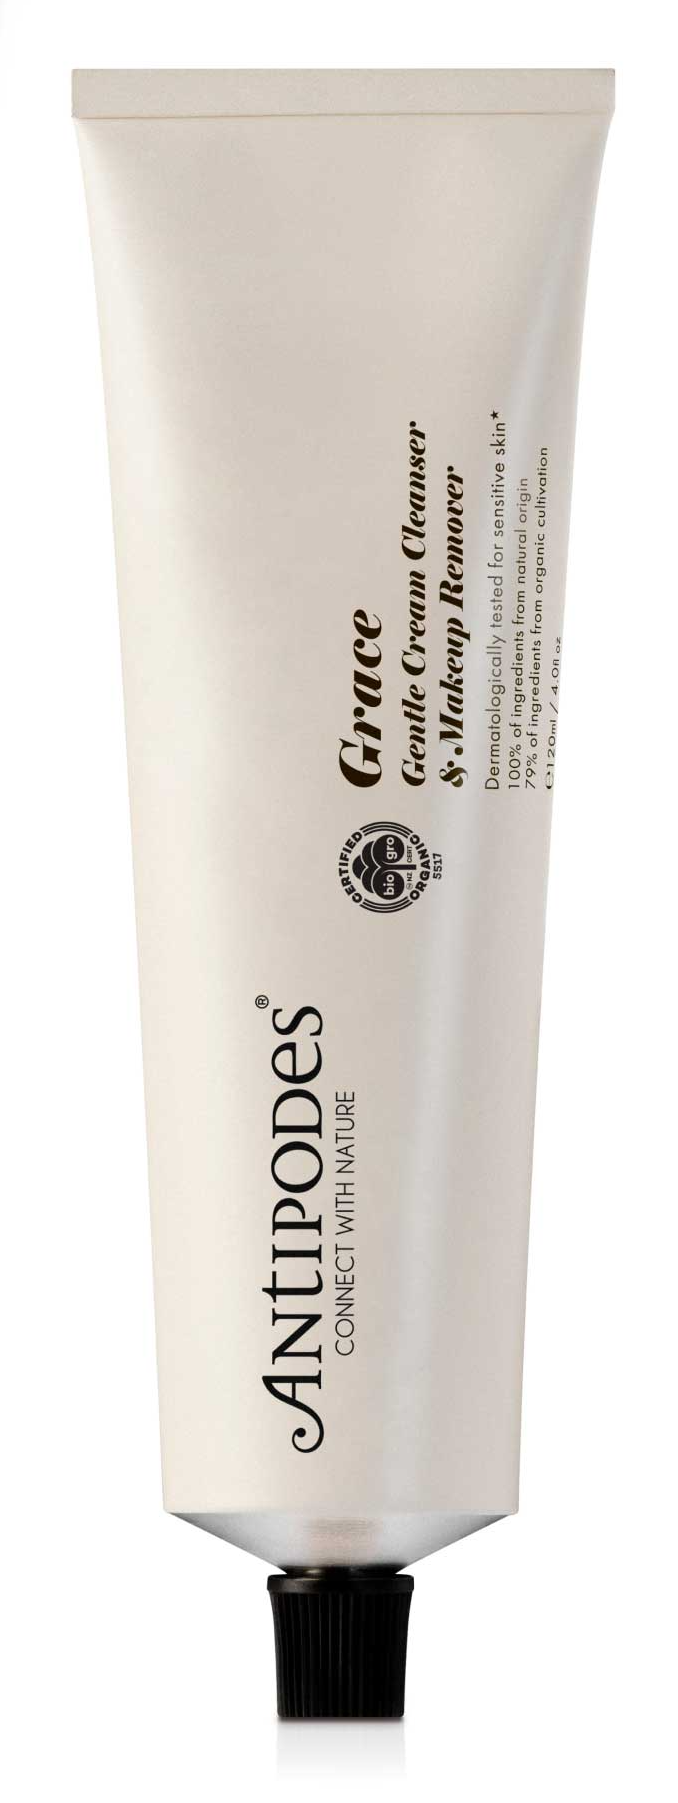 Antipodes Grace Gentle Cream Cleanser & Makeup Remover 120ml